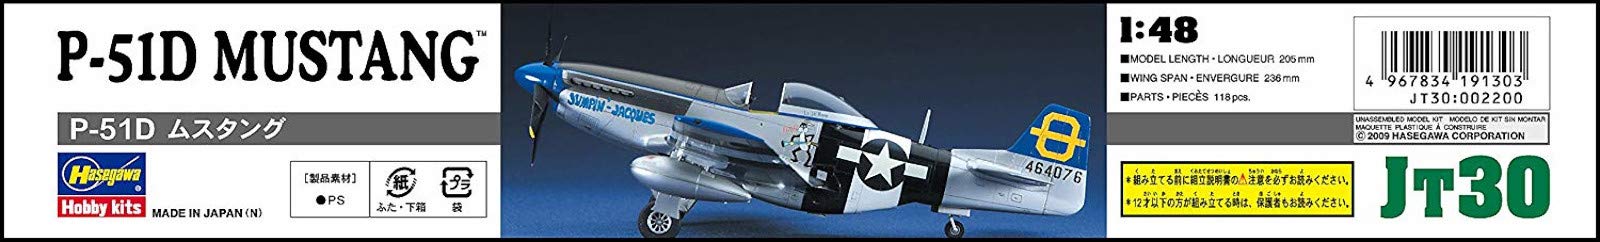 Hasegawa 1/48 united states army P-51D Mustang Plastic Model Kit HSGS9130 NEW_5